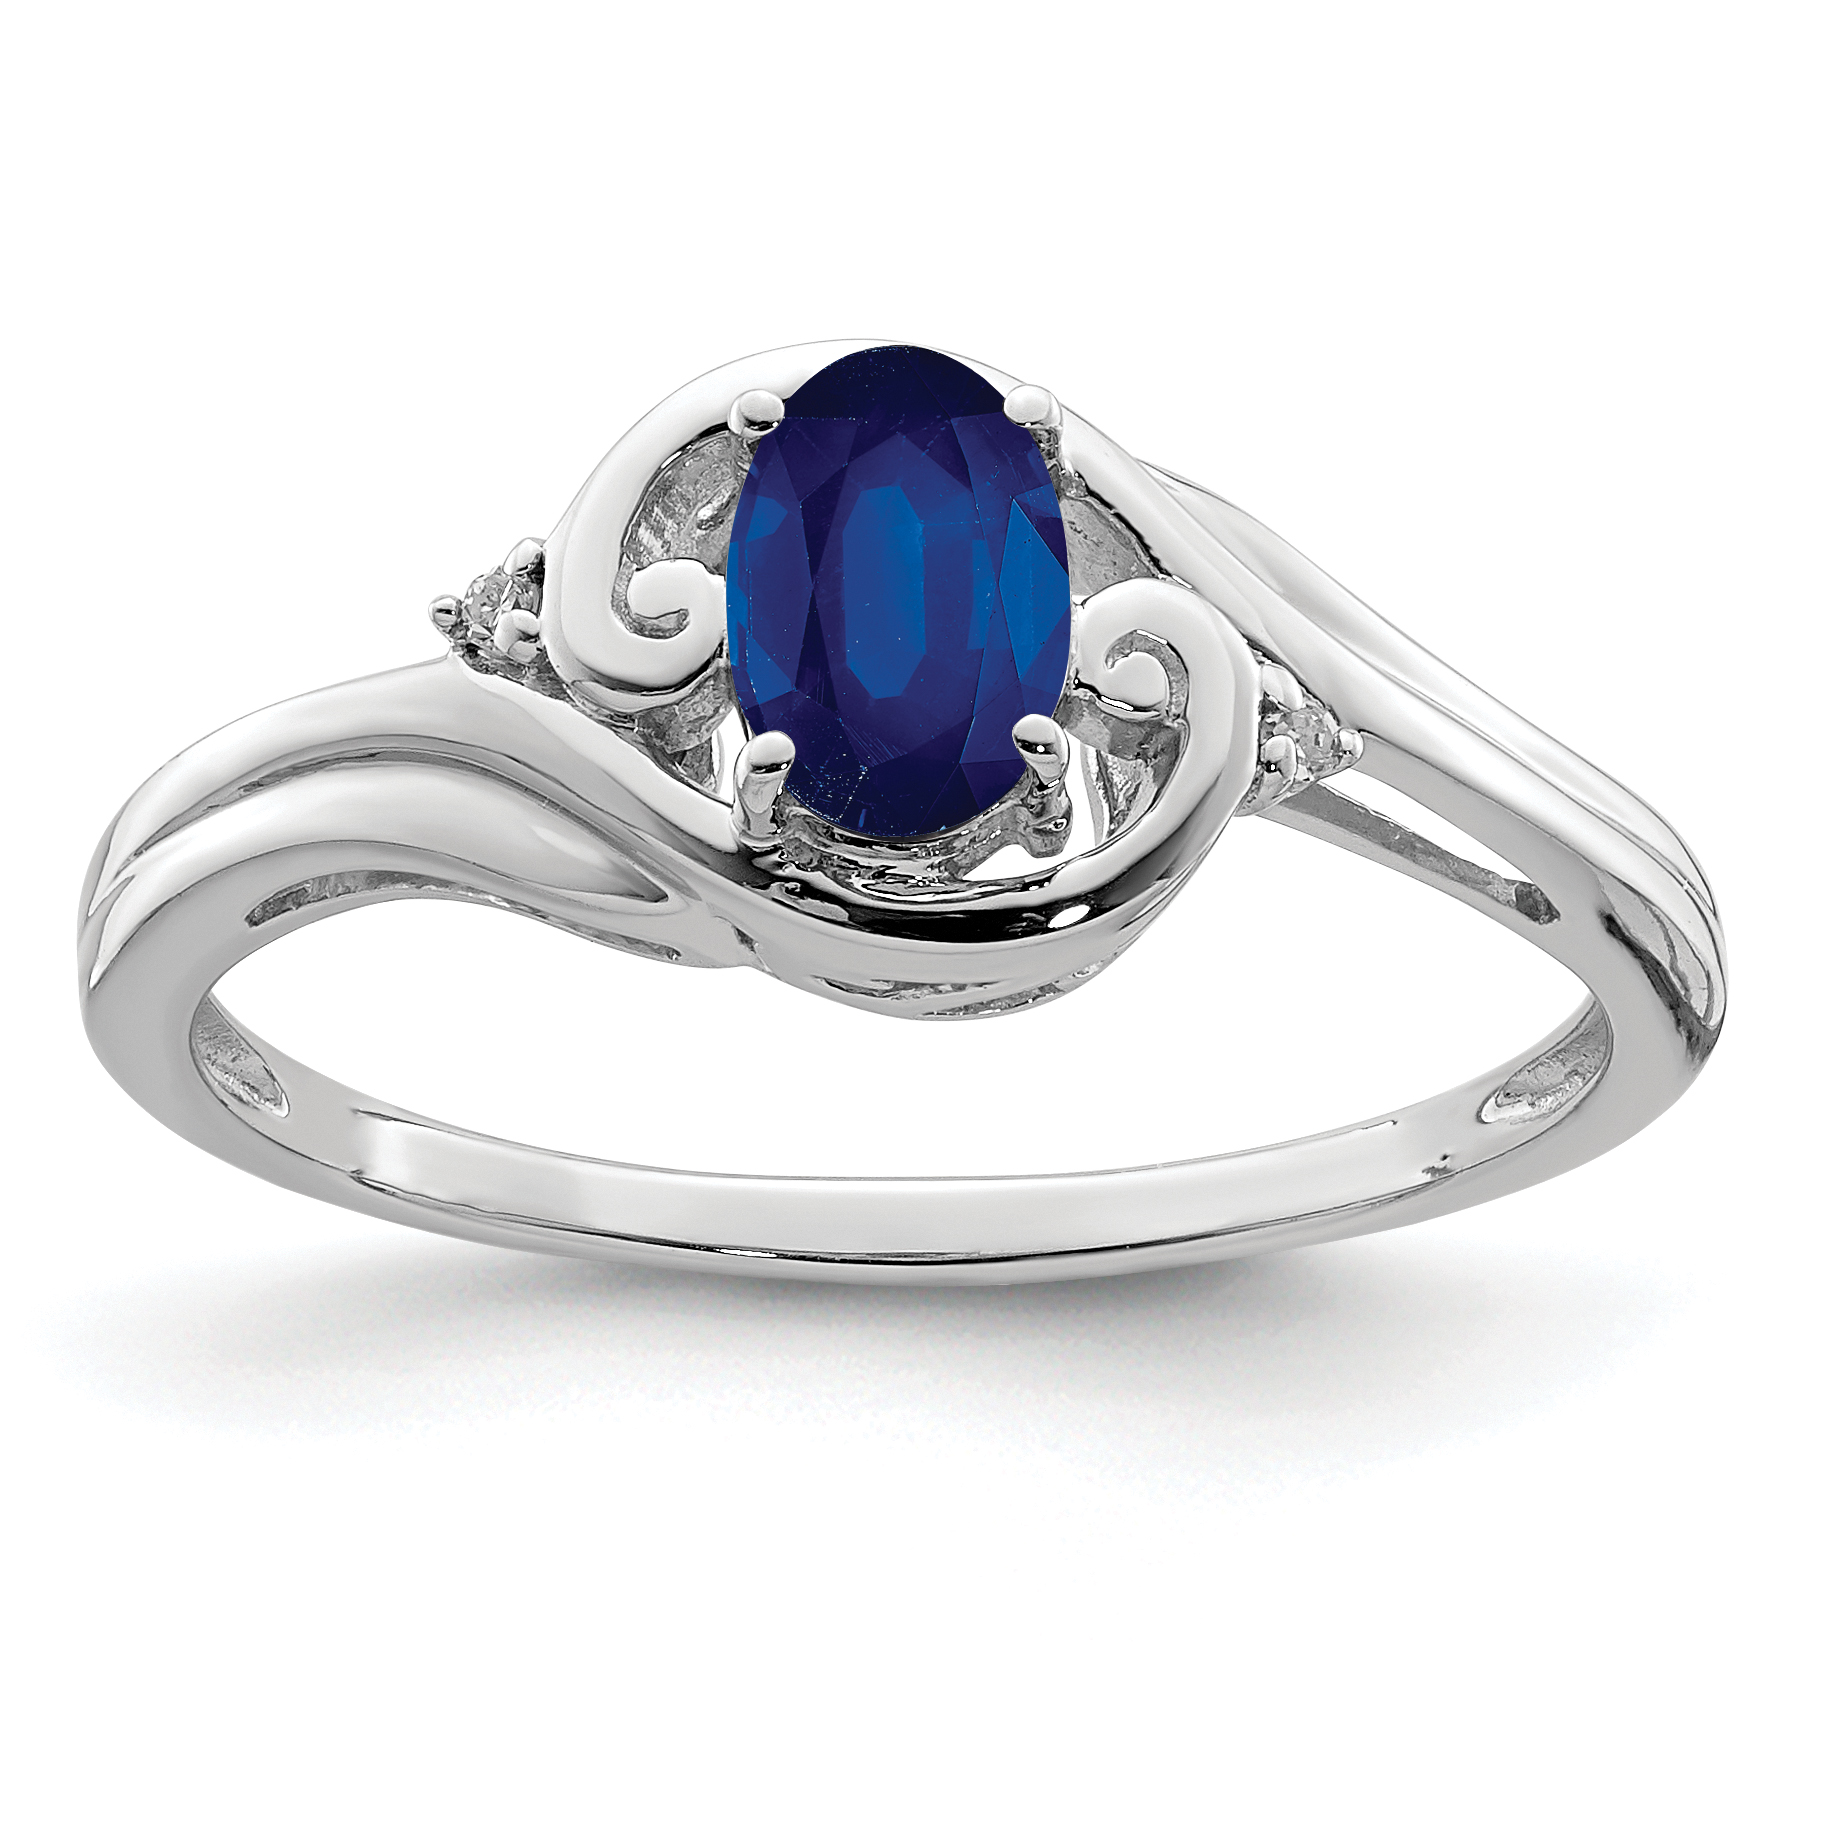 Core Silver Sterling Silver Rhodium Plated Diamond & Sapphire Ring